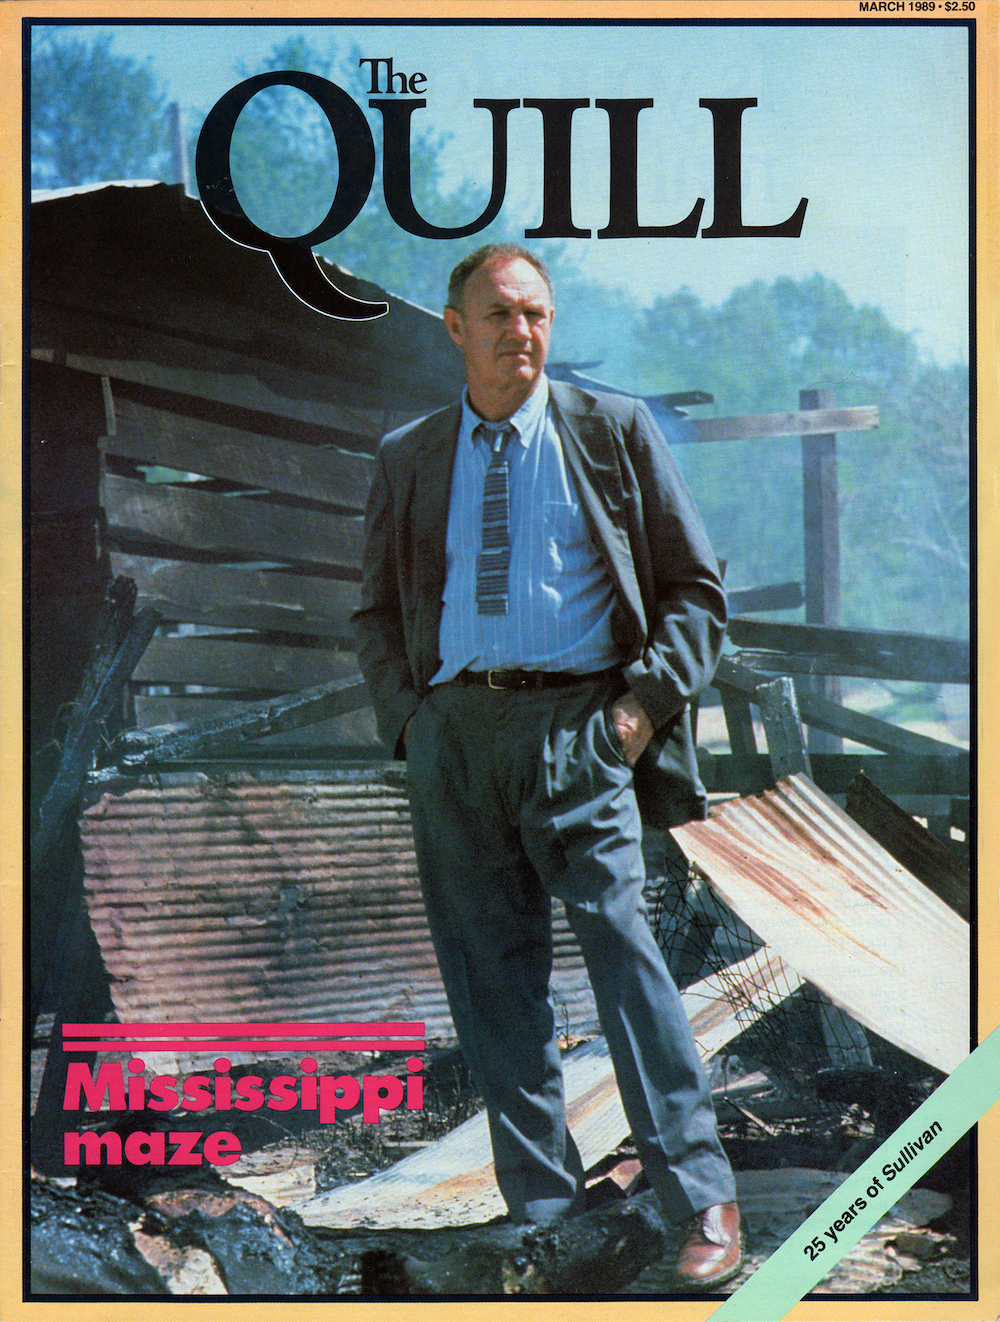 Gene Hackman on the cover of Quill magazine, March 1989